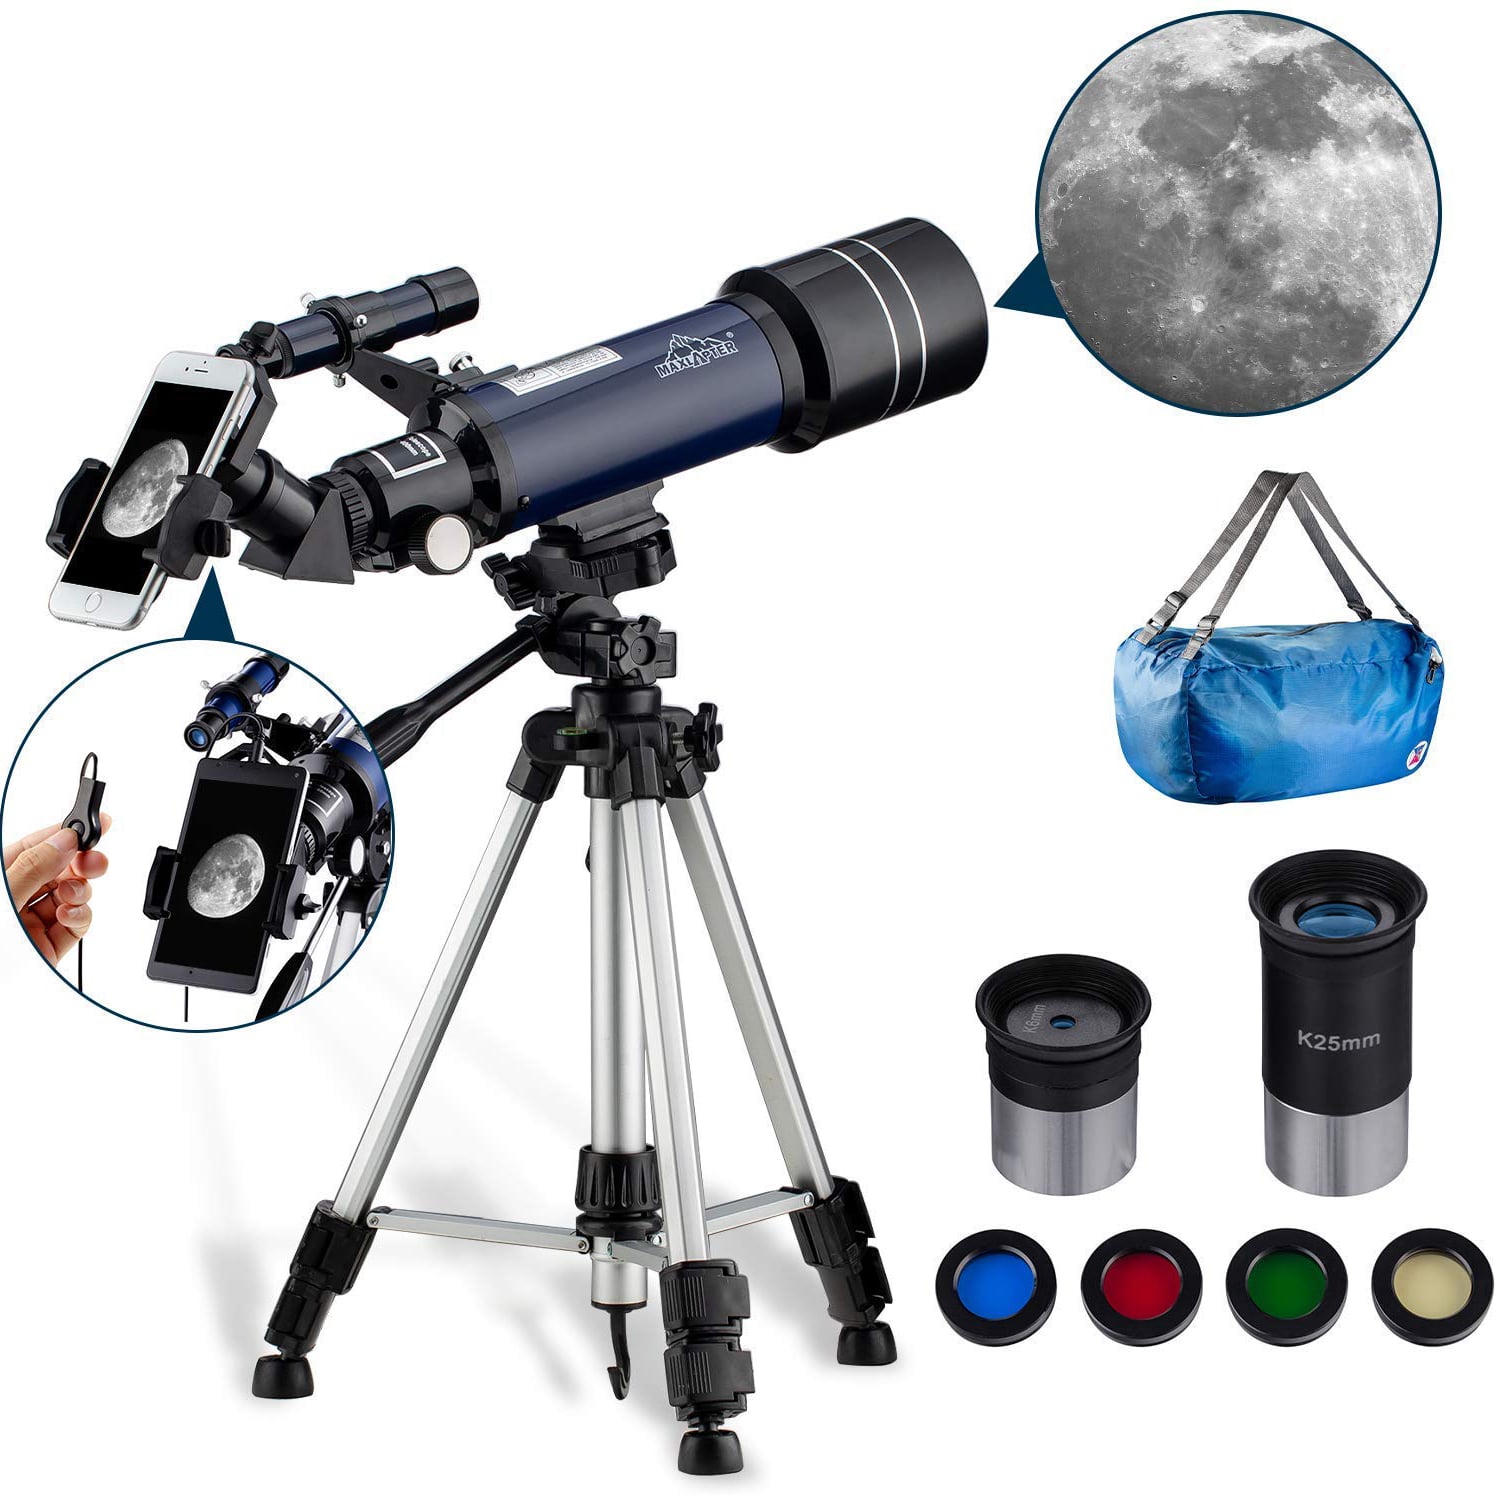 Top 10 Best Portable Travel Telescopes in 2021 Reviews | Guide Best Portable Telescope For Stargazing